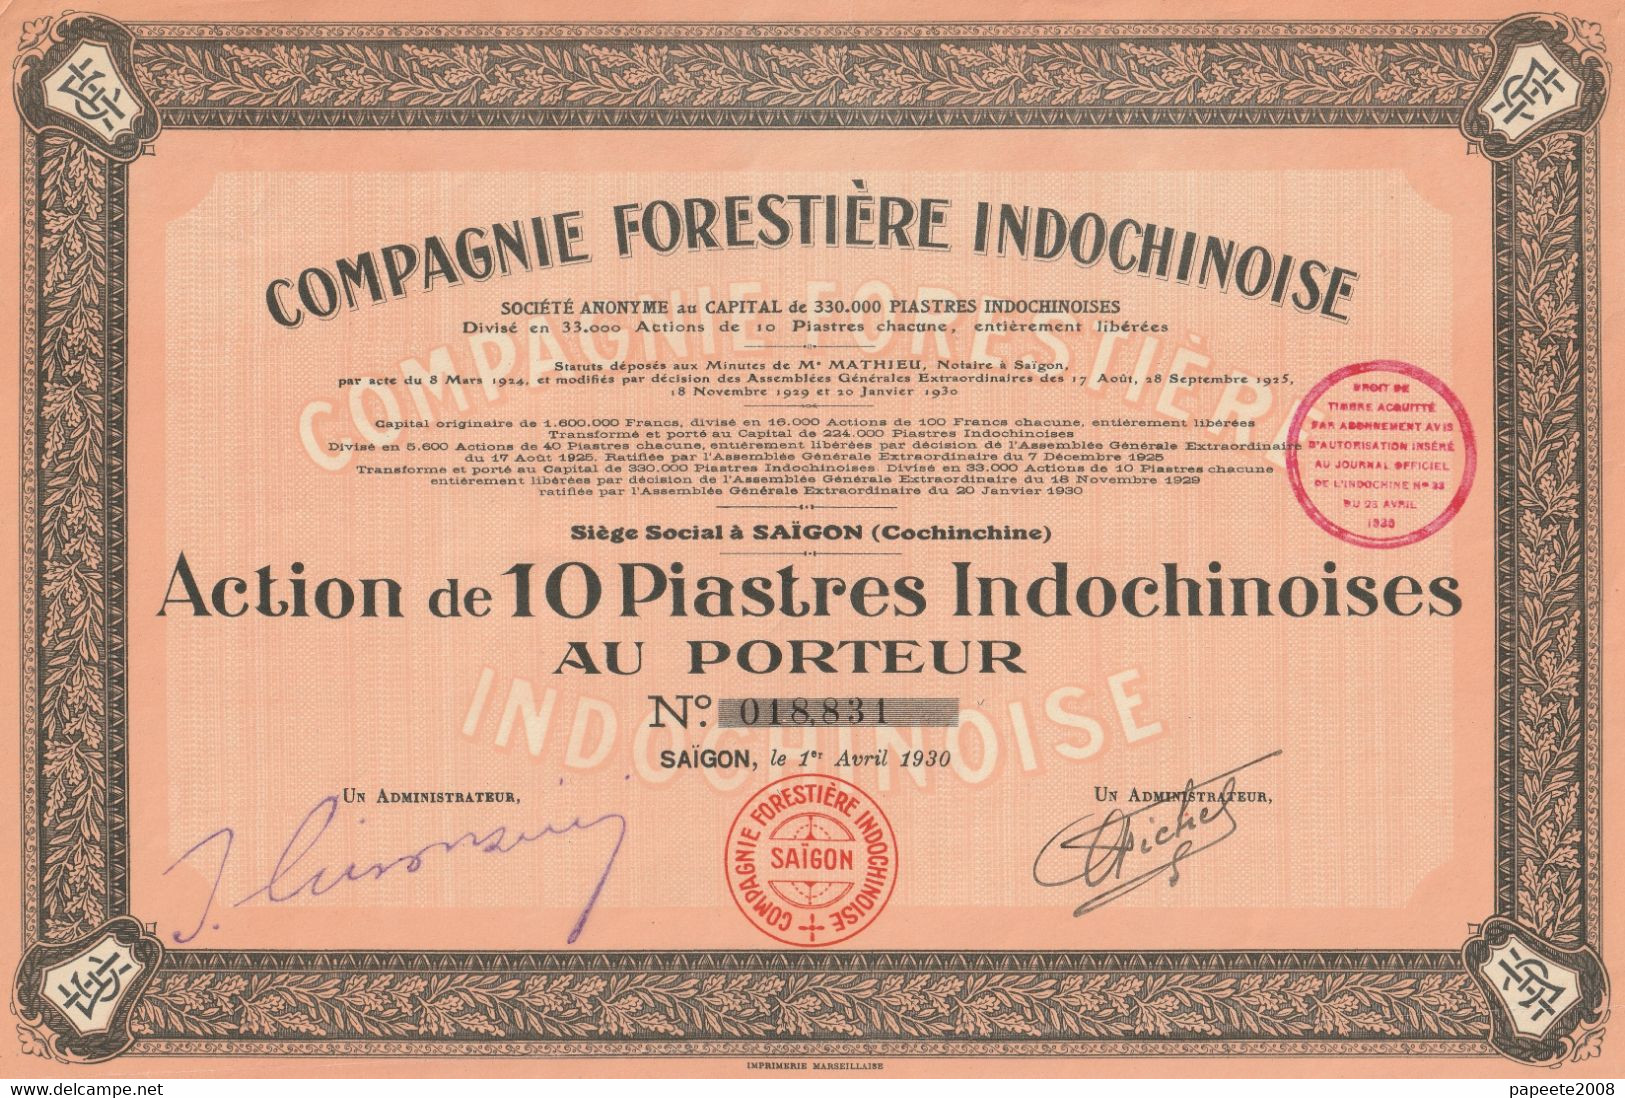 Indochine - Cie Forestière Indochinoise - A 10 Piastres Indochinoises - Asie